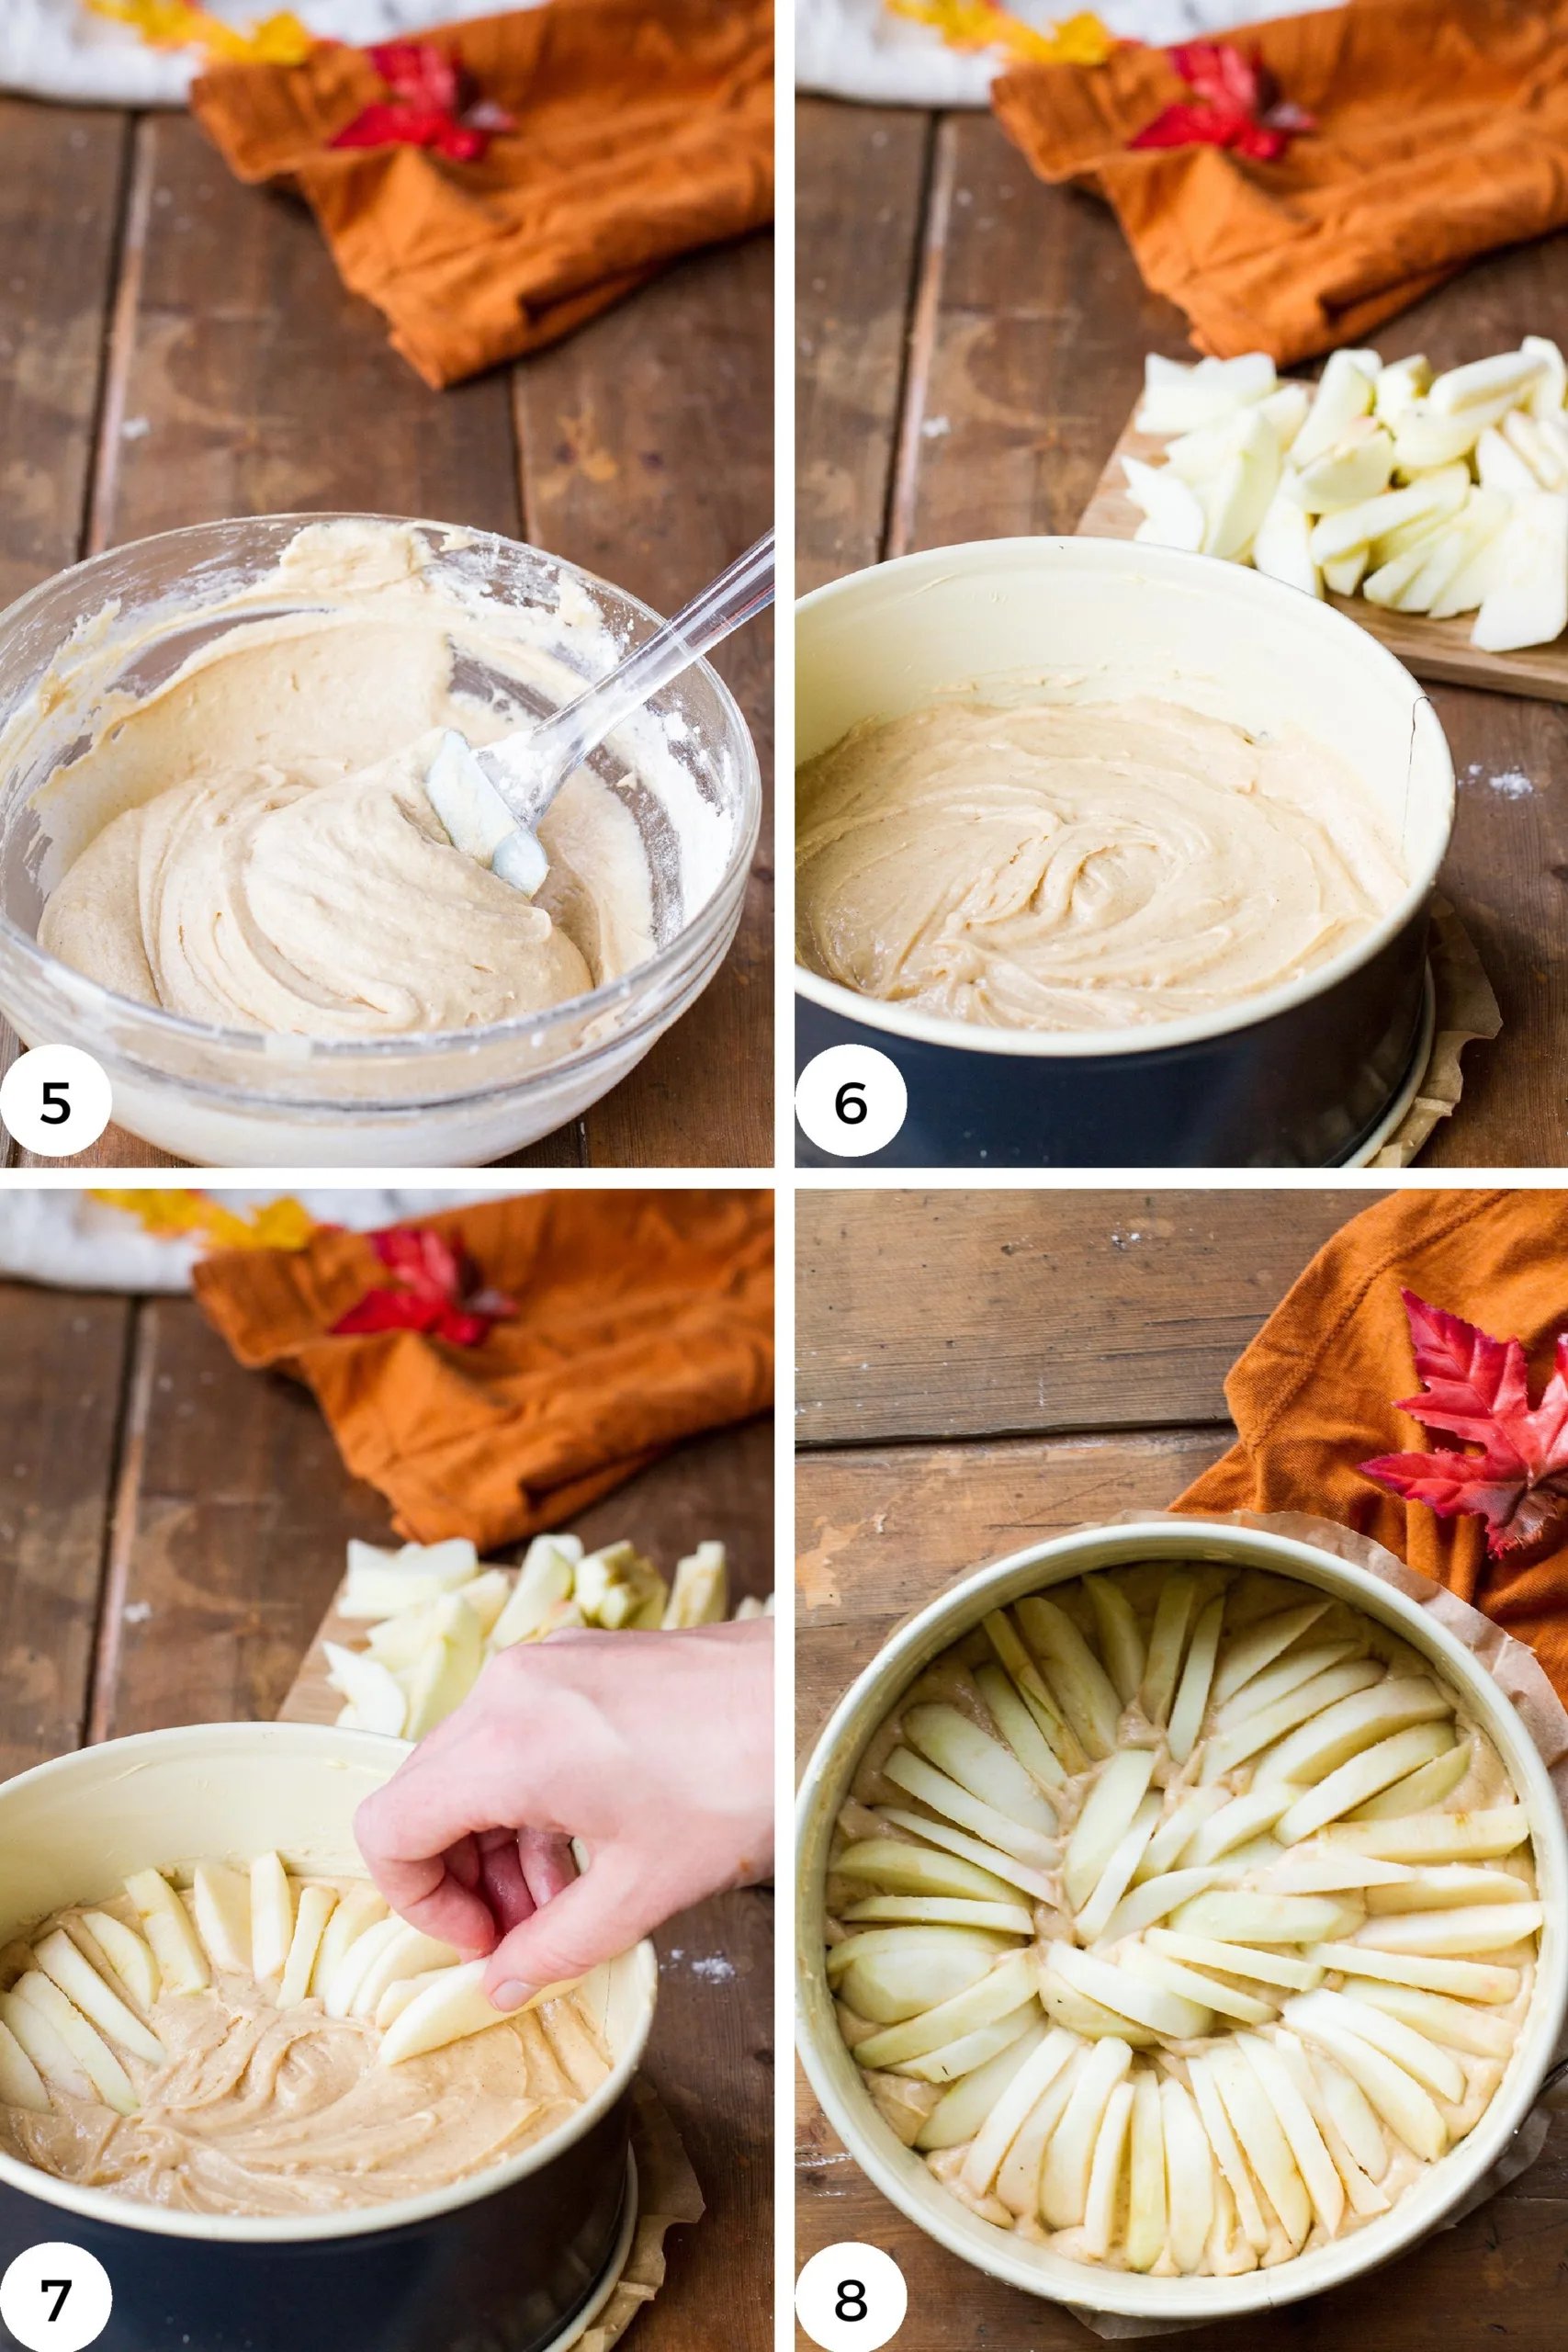 Steps to fill the cake pan with batter and apples.